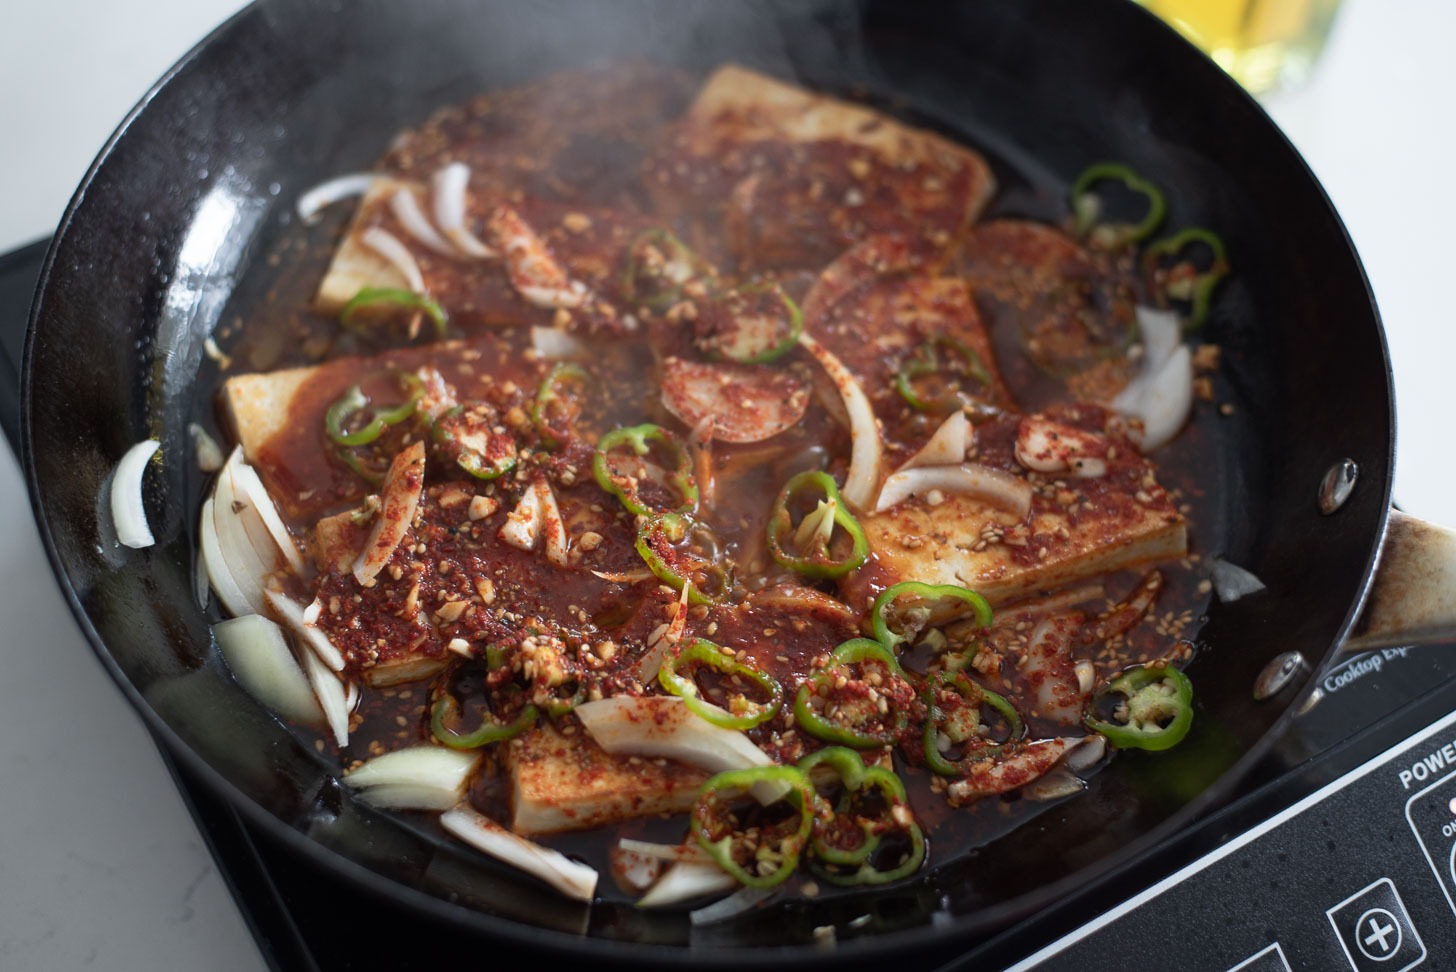 SPicy sauce and green chili slices are added on top of tofu slices in a skillet.